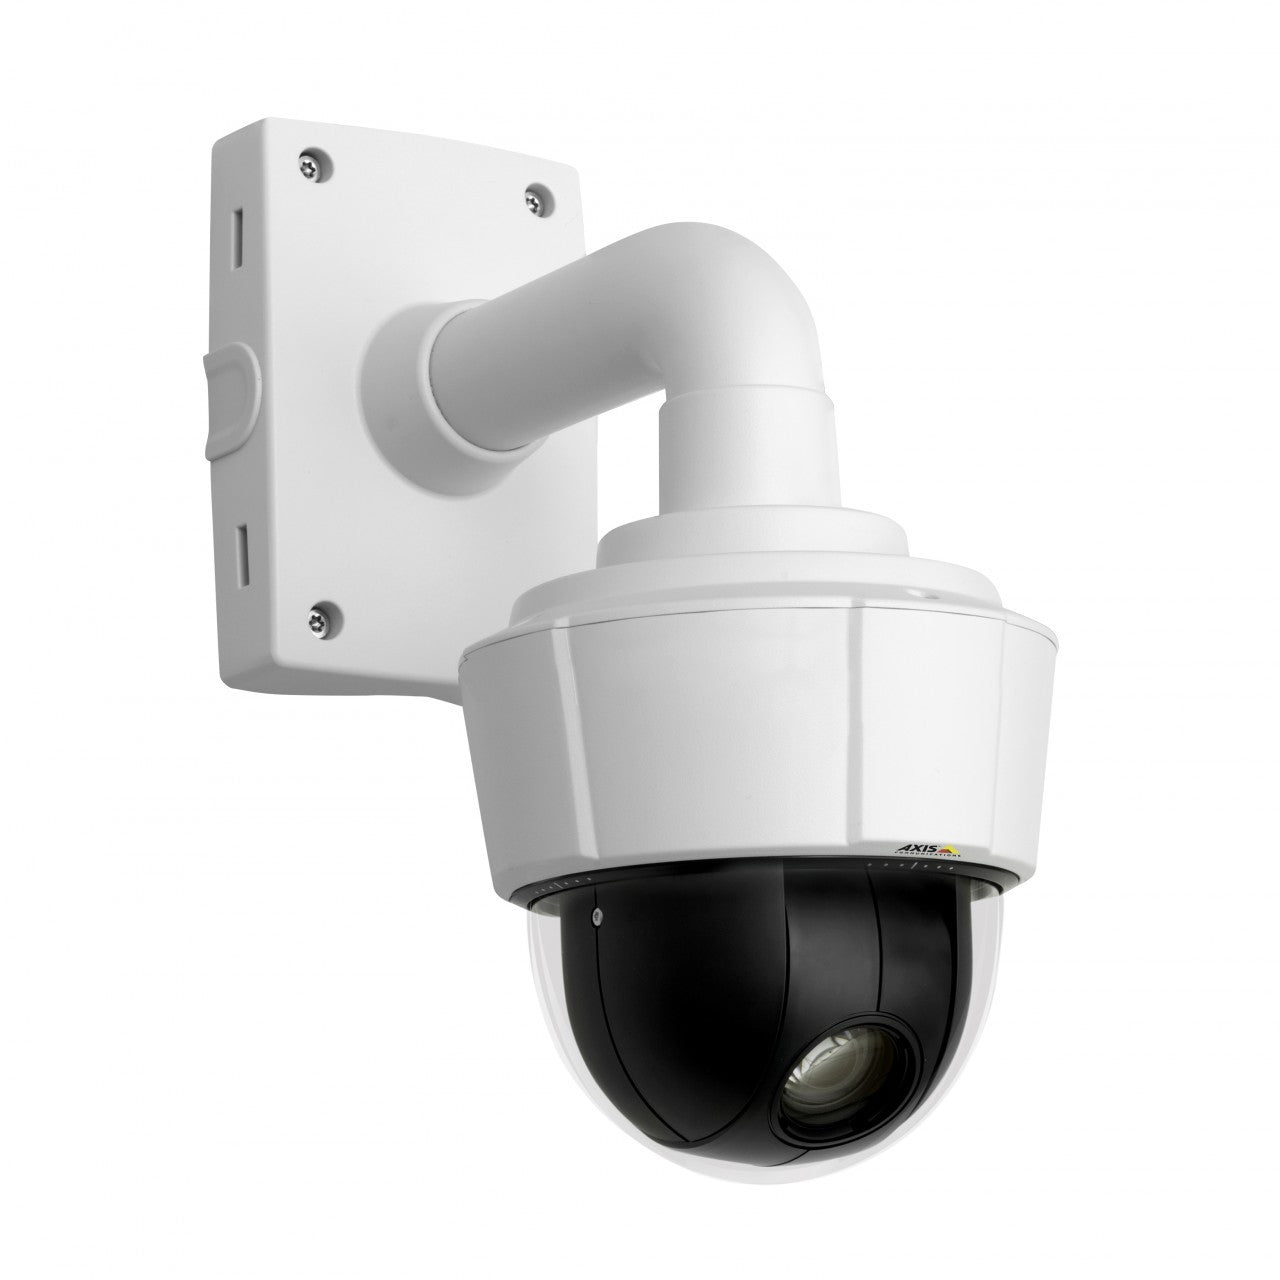 AXIS P5532 (0310-004) PTZ Dome Network Camera